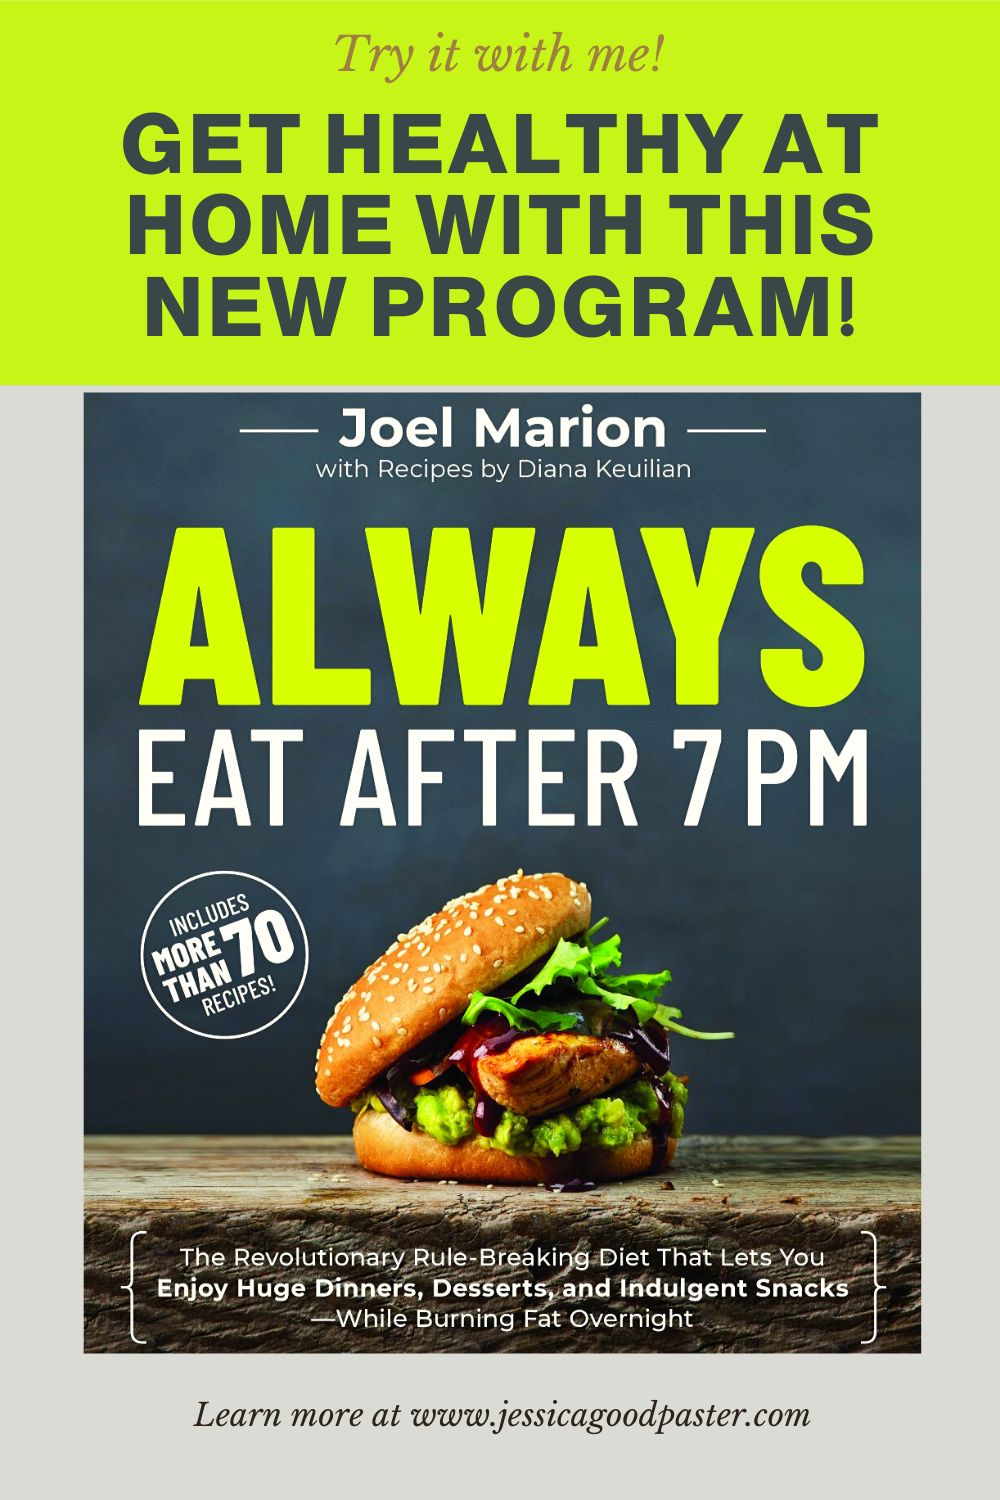 Why I'm Excited to Try Always Eat After 7 PM: The Revolutionary Rule-Breaking Diet That Lets You Enjoy Huge Dinners, Desserts, and Indulgent Snacks—While Burning Fat Overnight by Joel Marion. #AlwaysEatAfter7PM, #AlwaysEatBook, #BioTrust #healthyeating #loseweight #getfit #diet